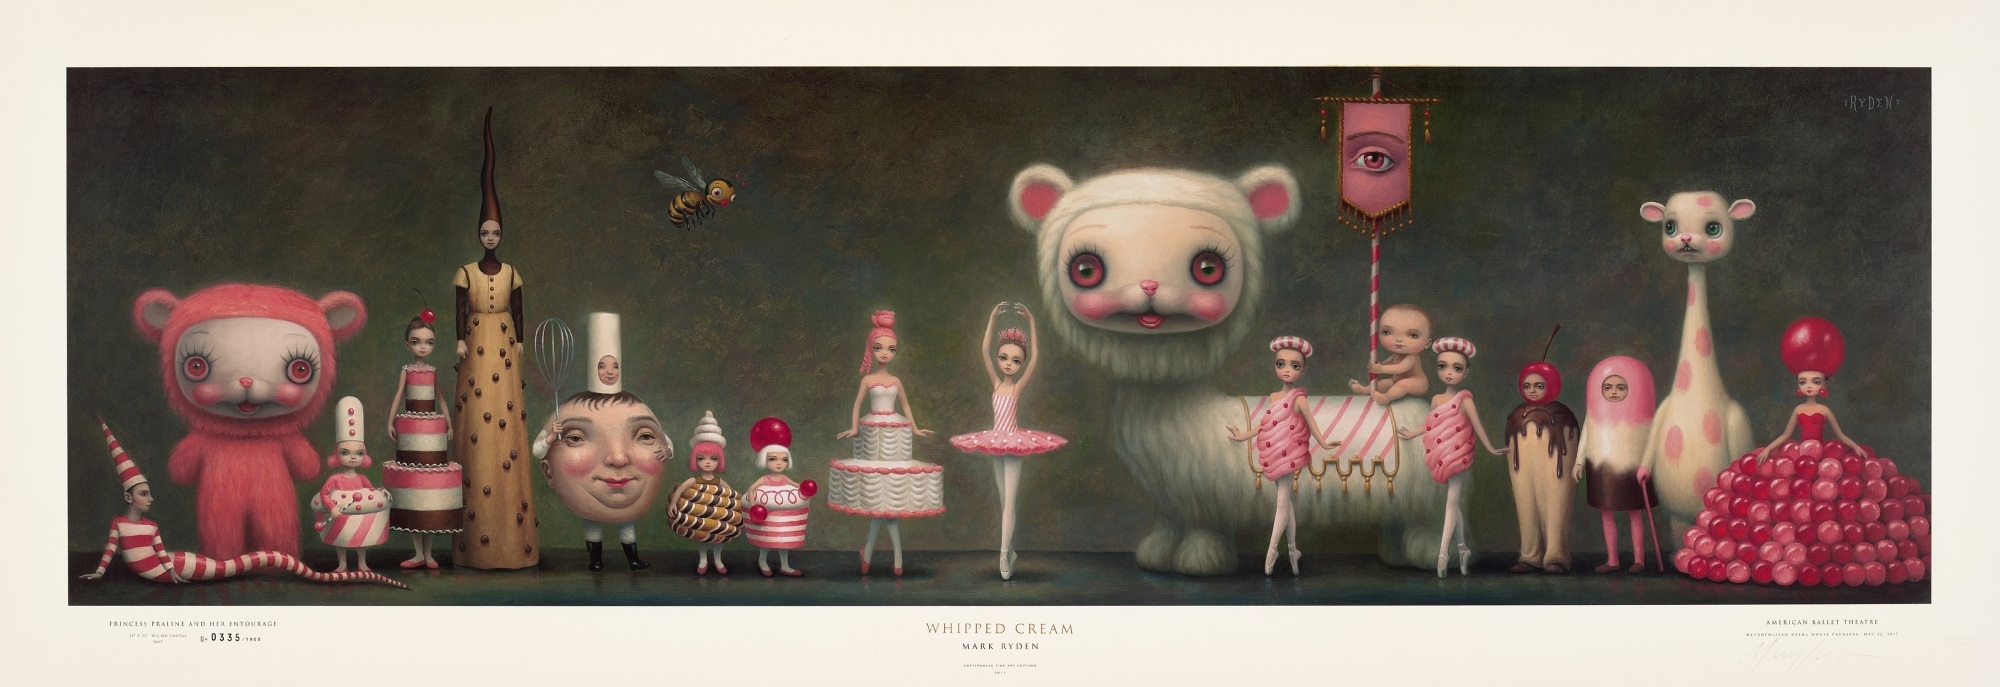 Artwork by Mark Ryden, Princess Praline and Her Entourage, Made of Offset lithograph in colours, on coated wove paper, with full margins.